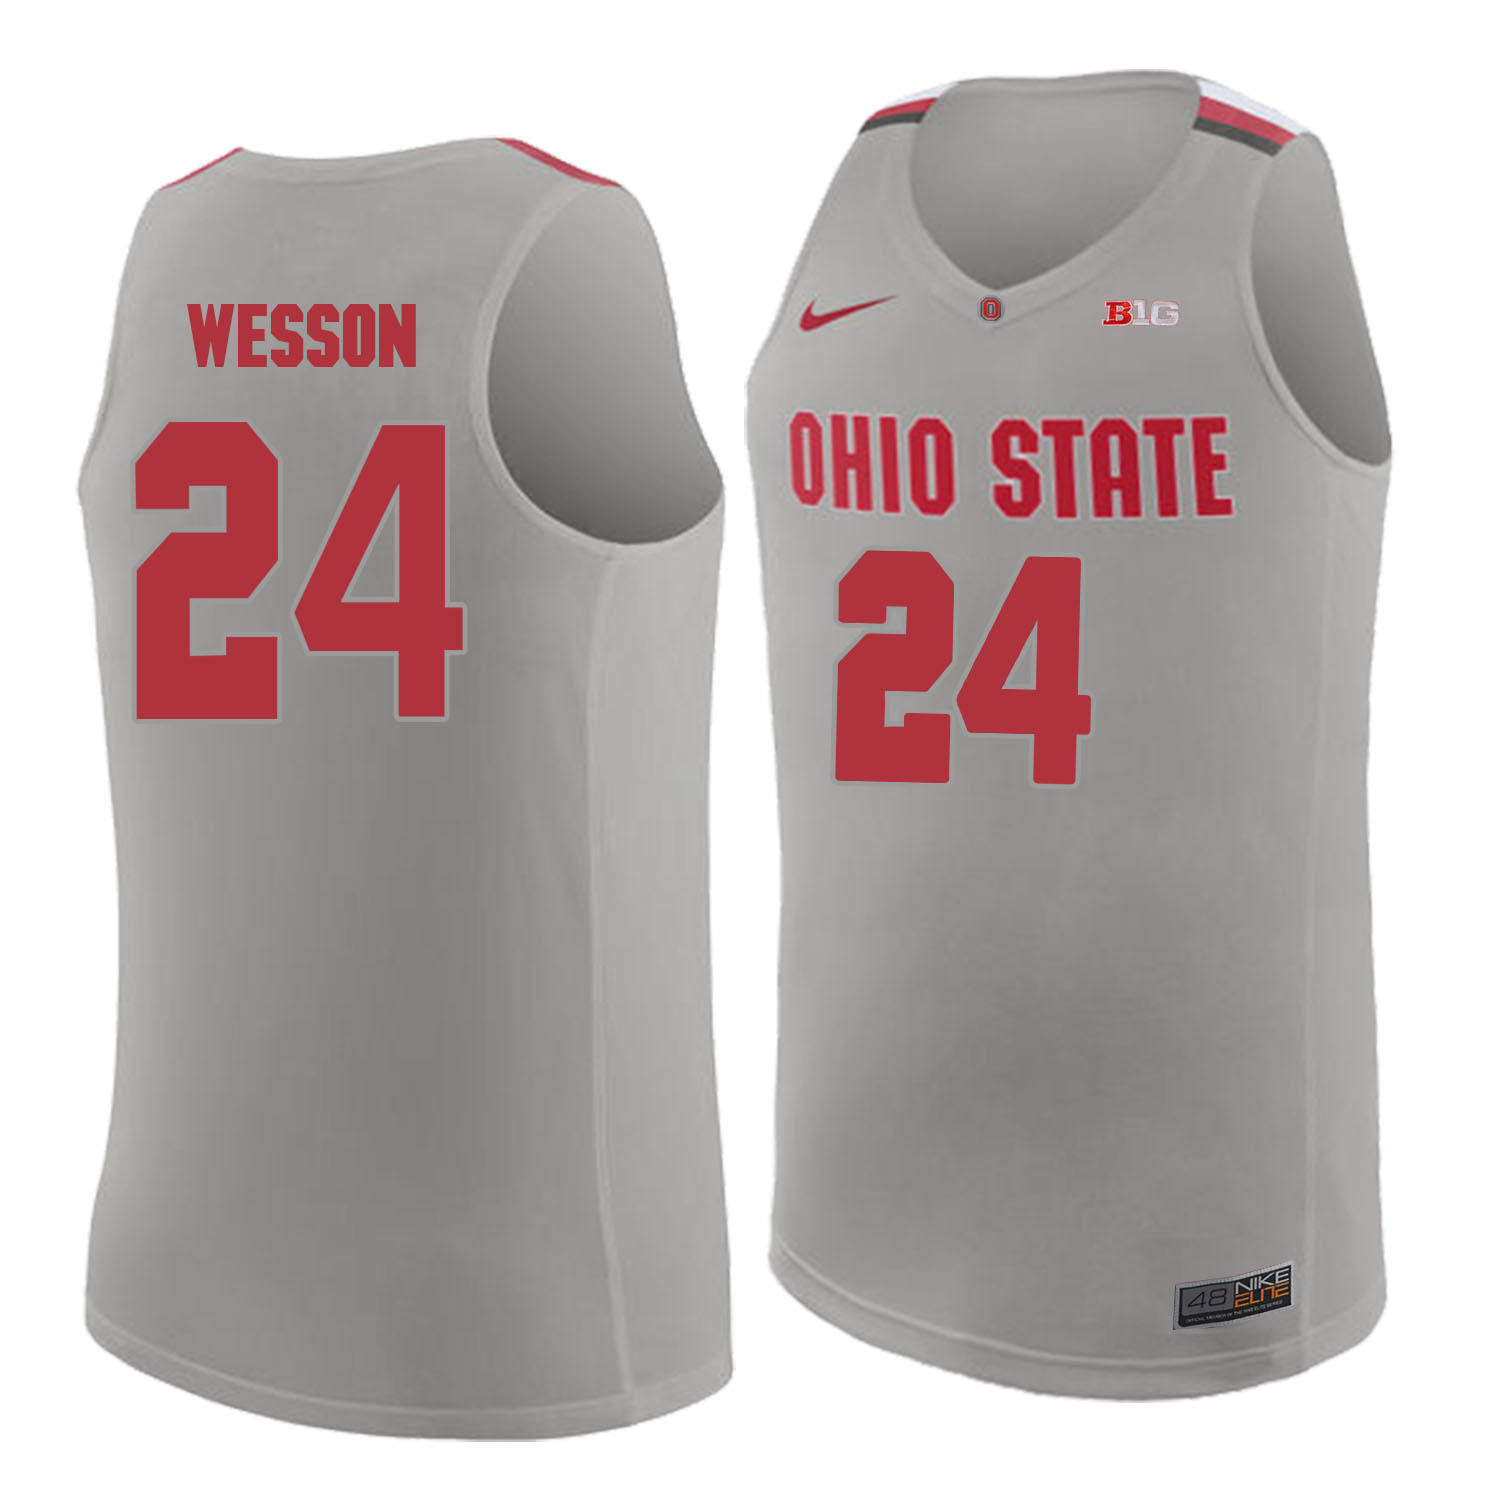 Ohio State Buckeyes 24 Andre Wesson Gray College Basketball Jersey